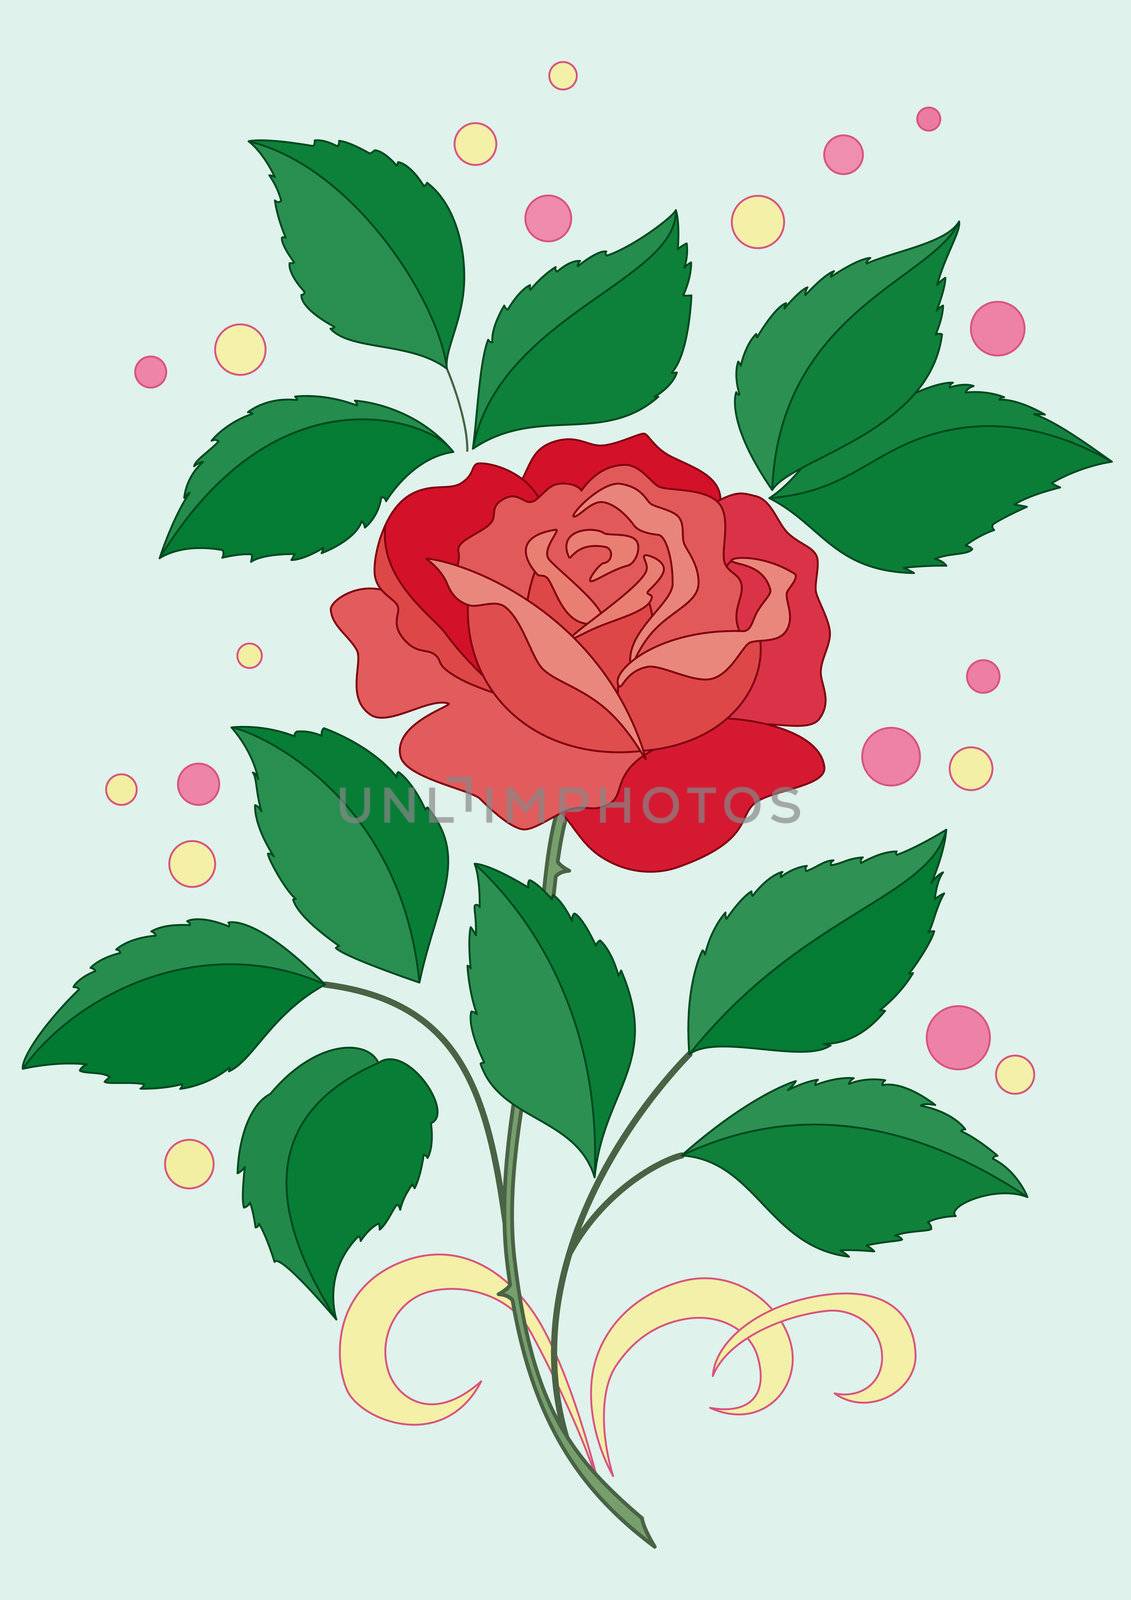 Flower rose with green leaves and scarlet petals and confetti on blue background, vector